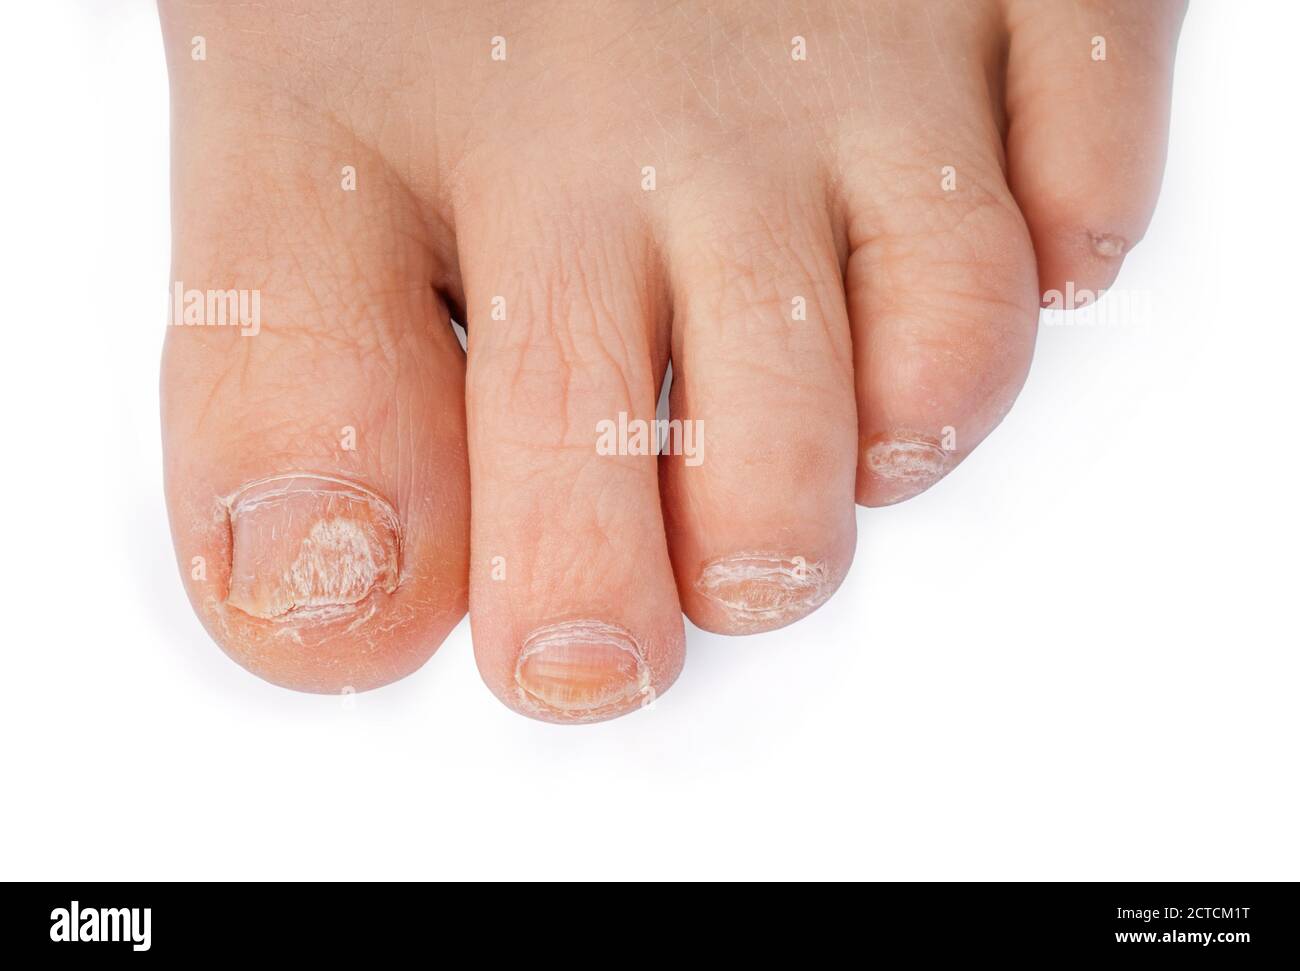 Feet with Fungal Toe Nail Infection Stock Image - Image of closeup,  athletes: 175714629